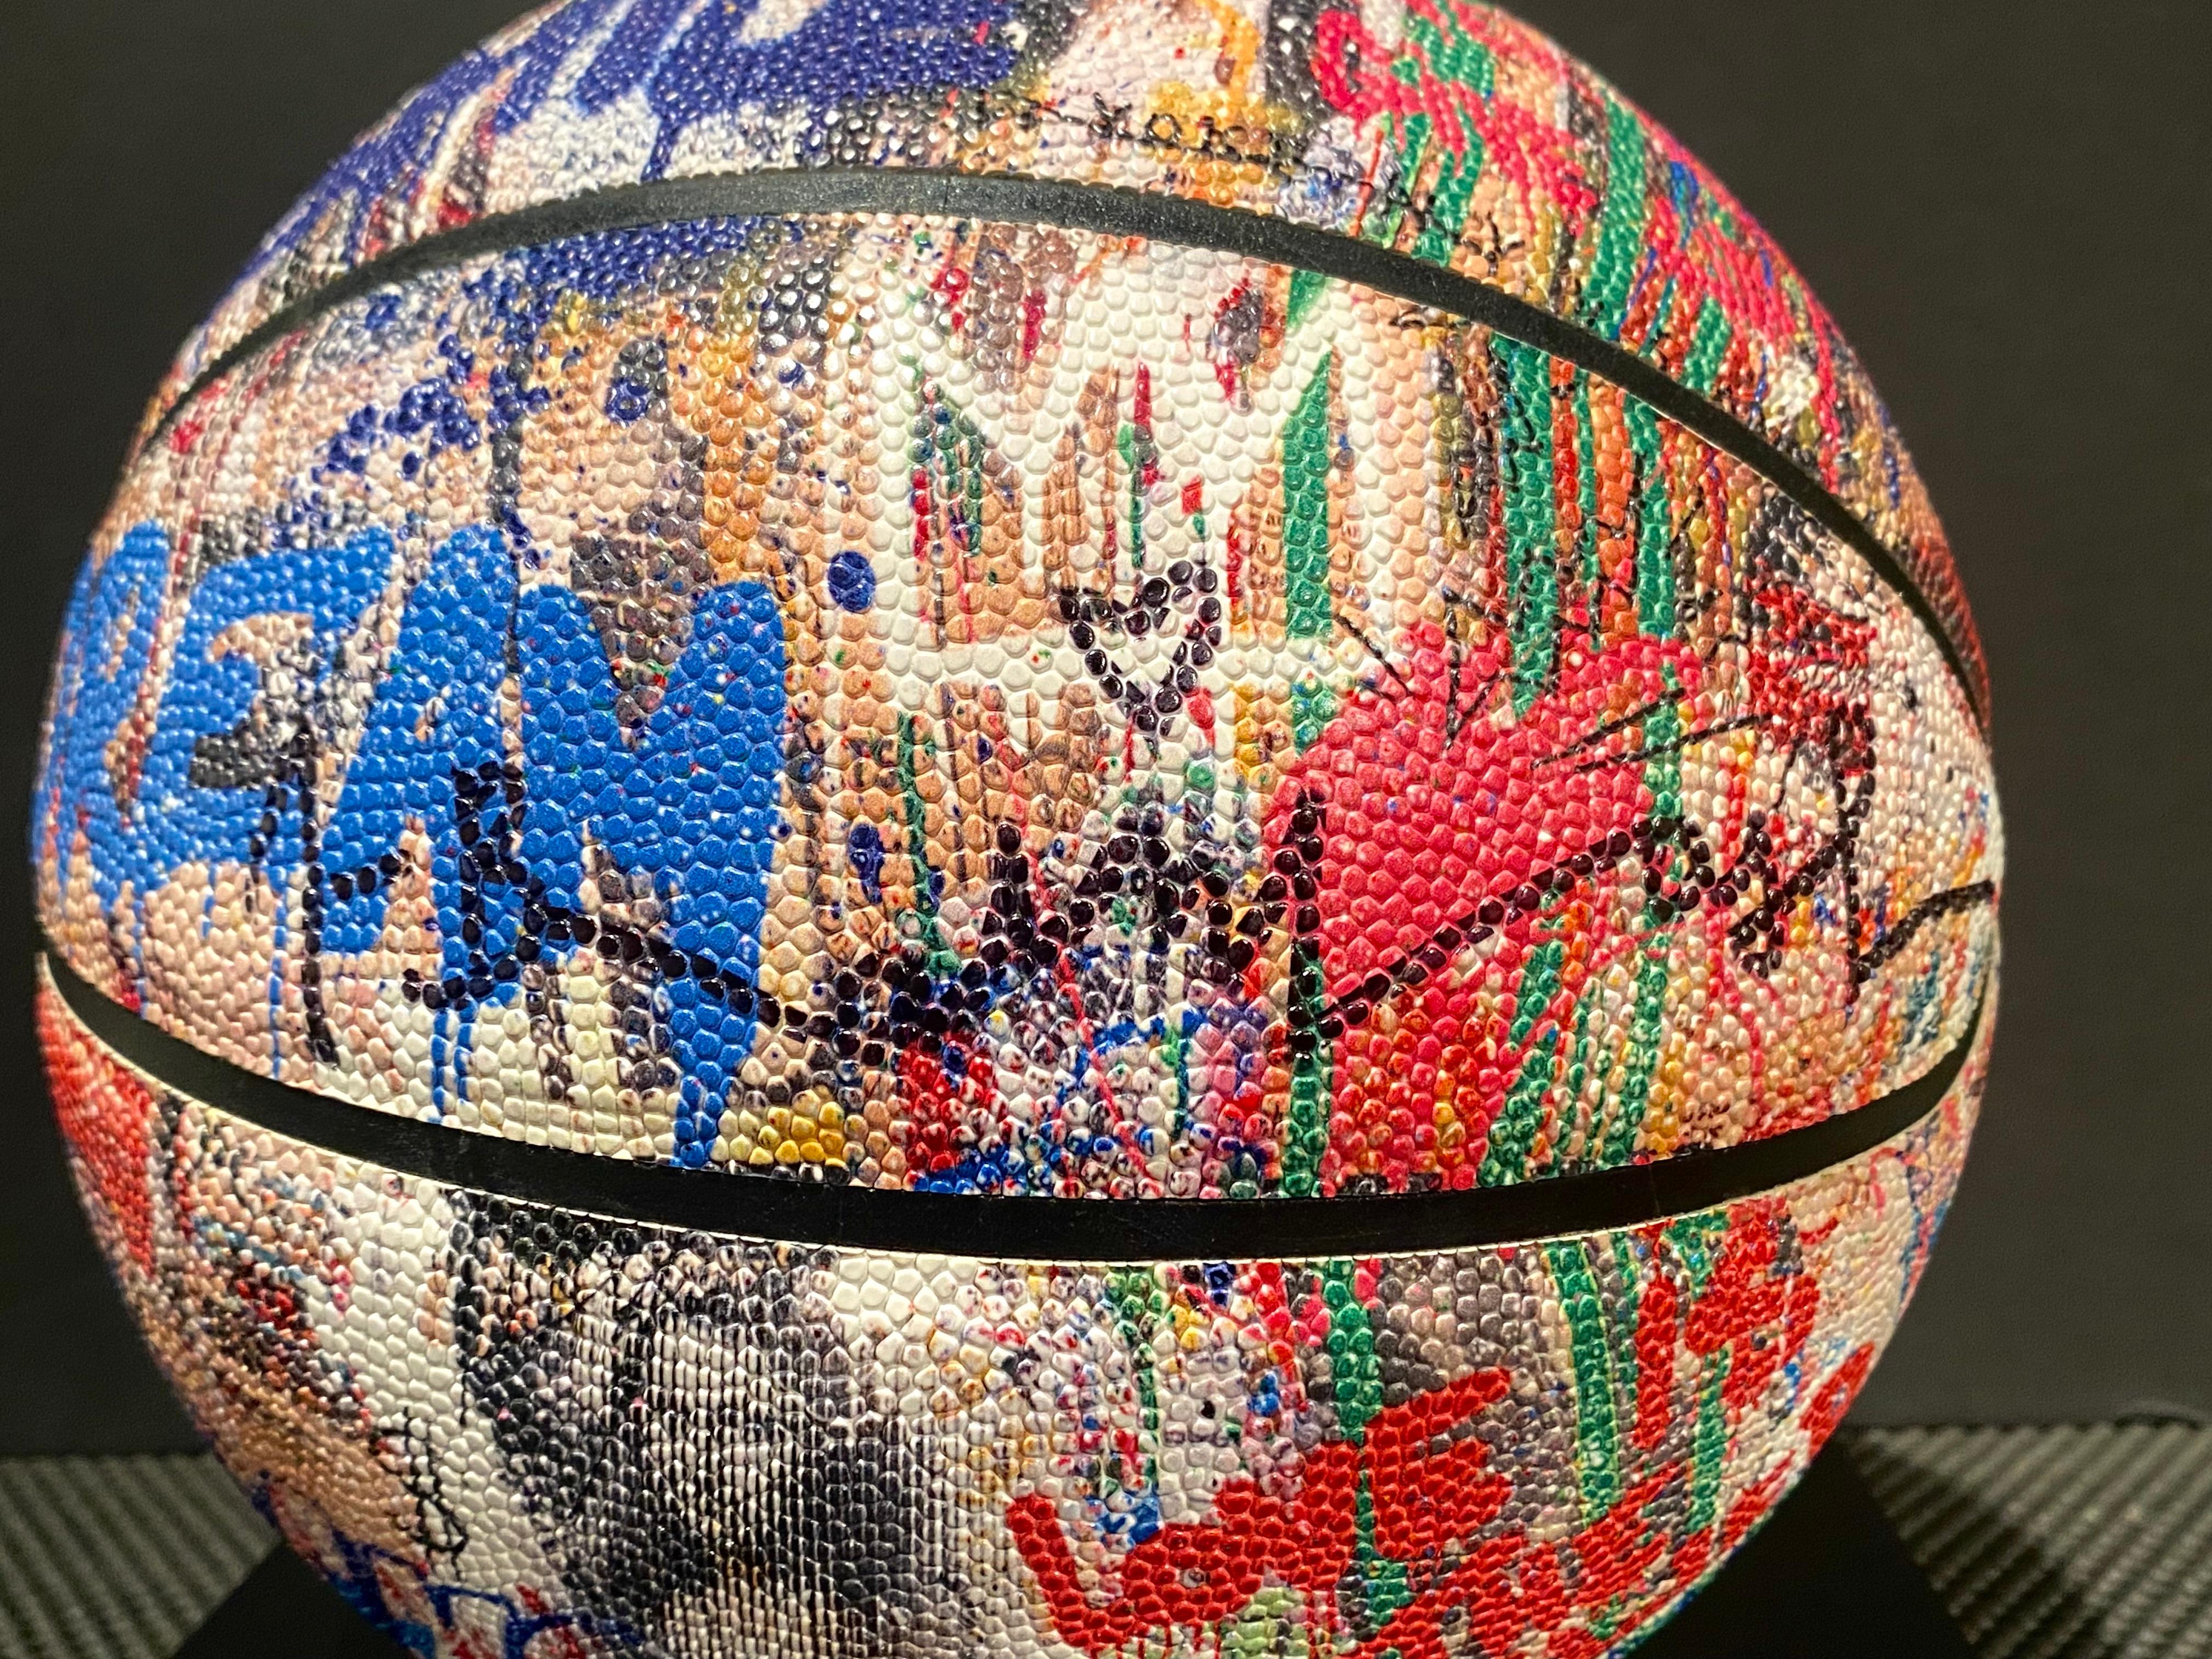 Fun and collectible, an original basketball screen-printed by Mr. Brainwash, hand-signed and numbered, with artist’s provided certification, this three-dimensional sculpture measures 9.5 inches in diameter (29.5 inches in circumference), and is